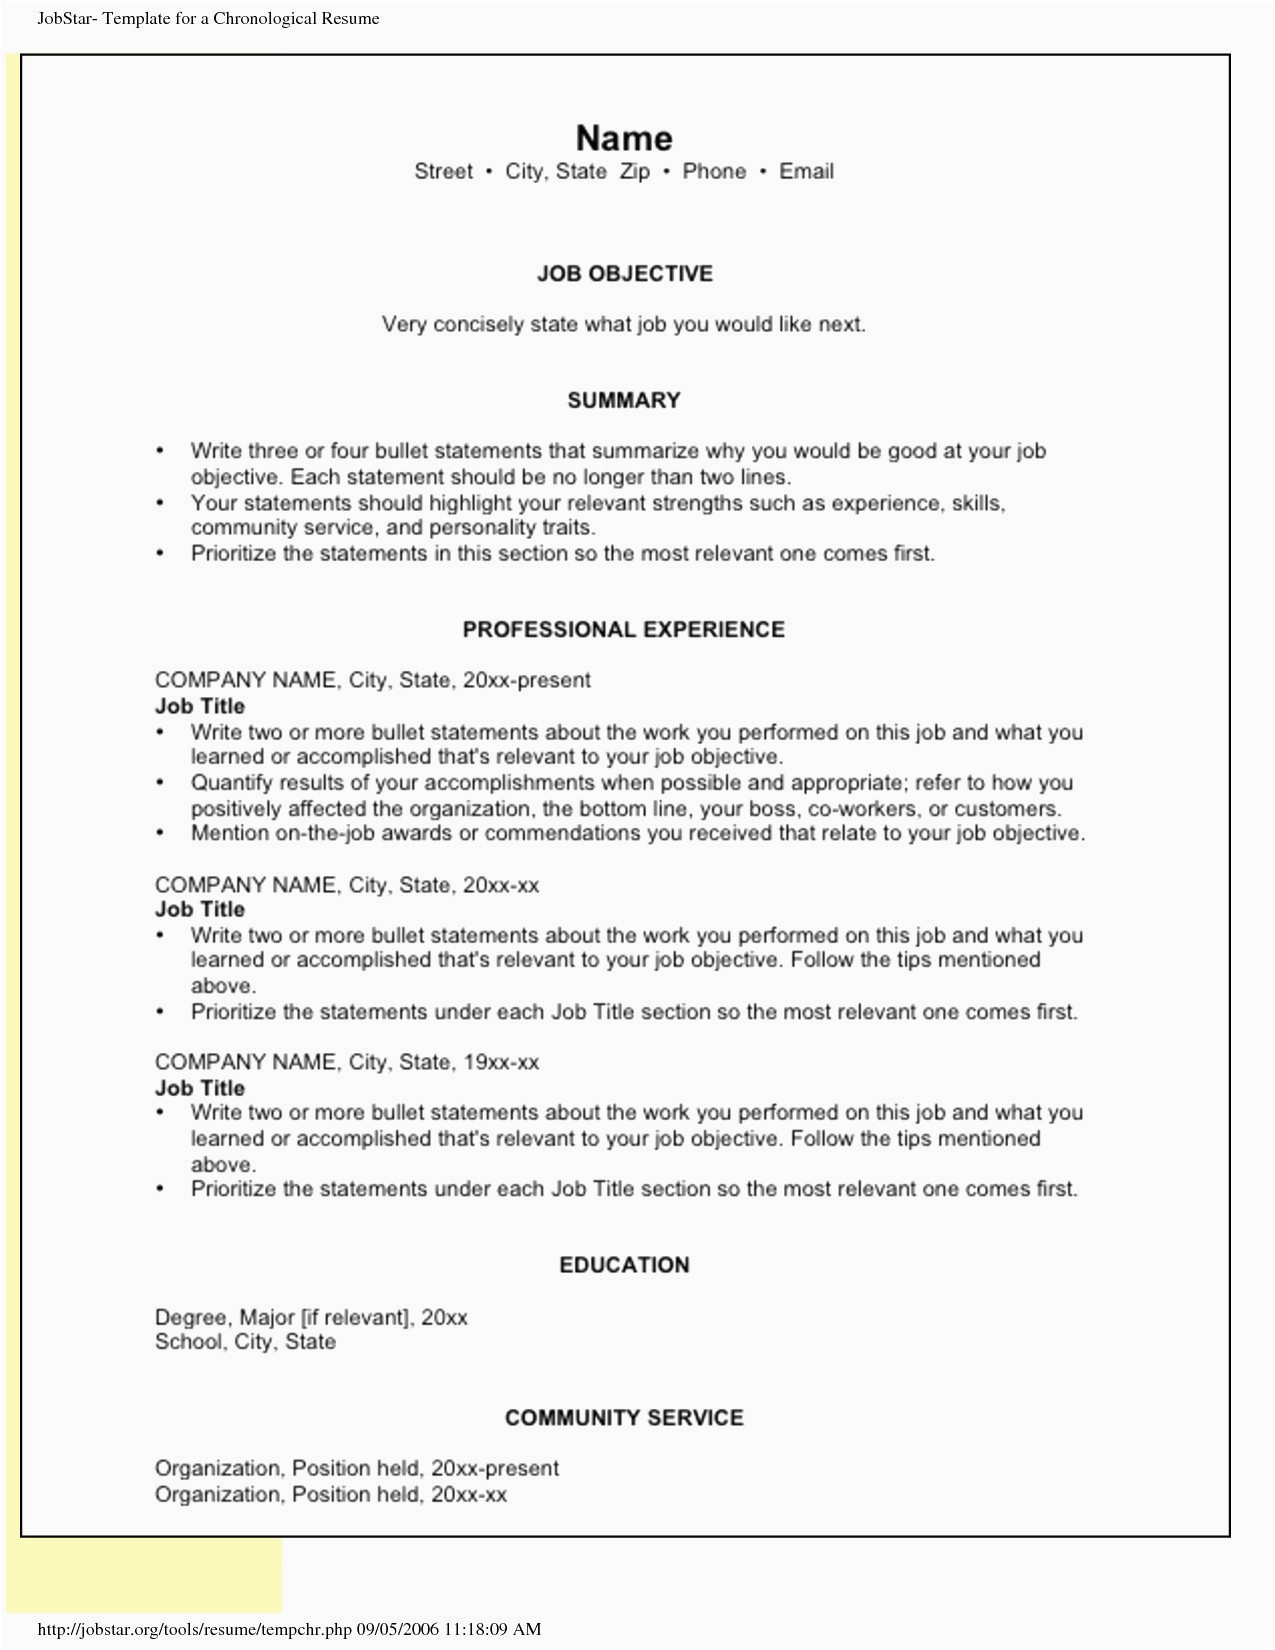 Resume Templates for Mums Returning to Work 13 Sample Resume Stay at Home Mom Returning to Work